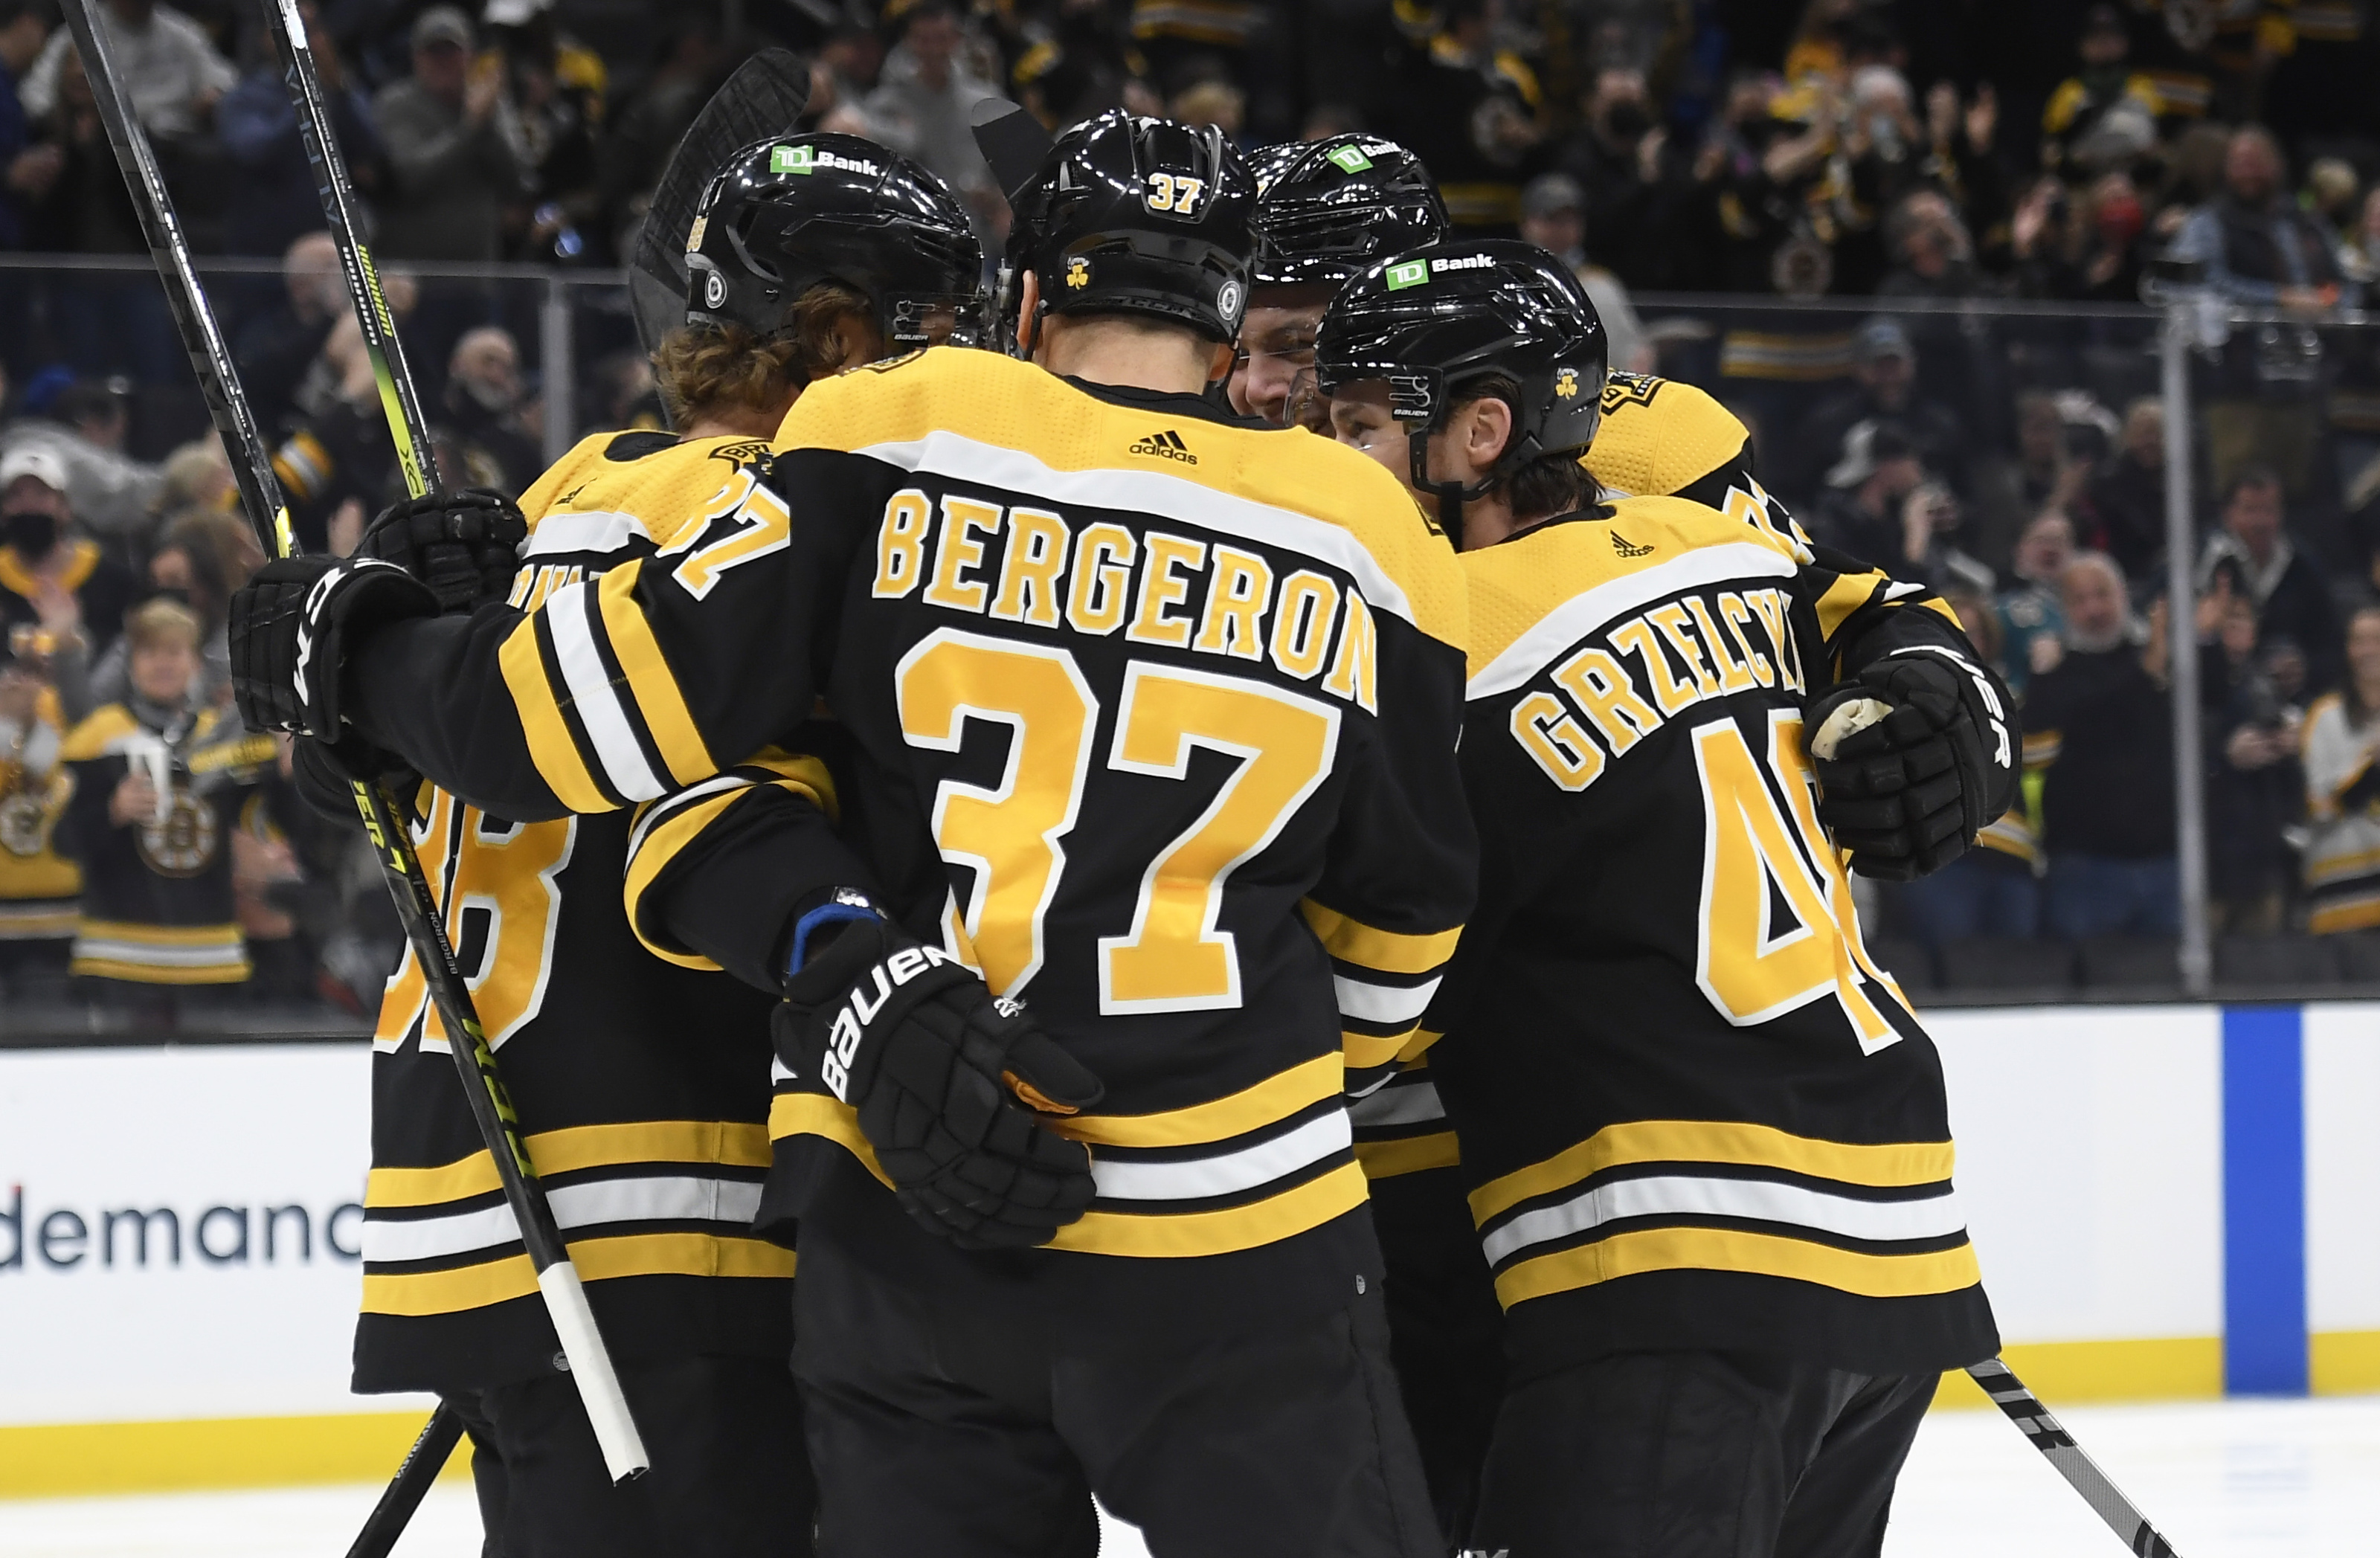 Brad Marchand stays hot even in Bruins loss